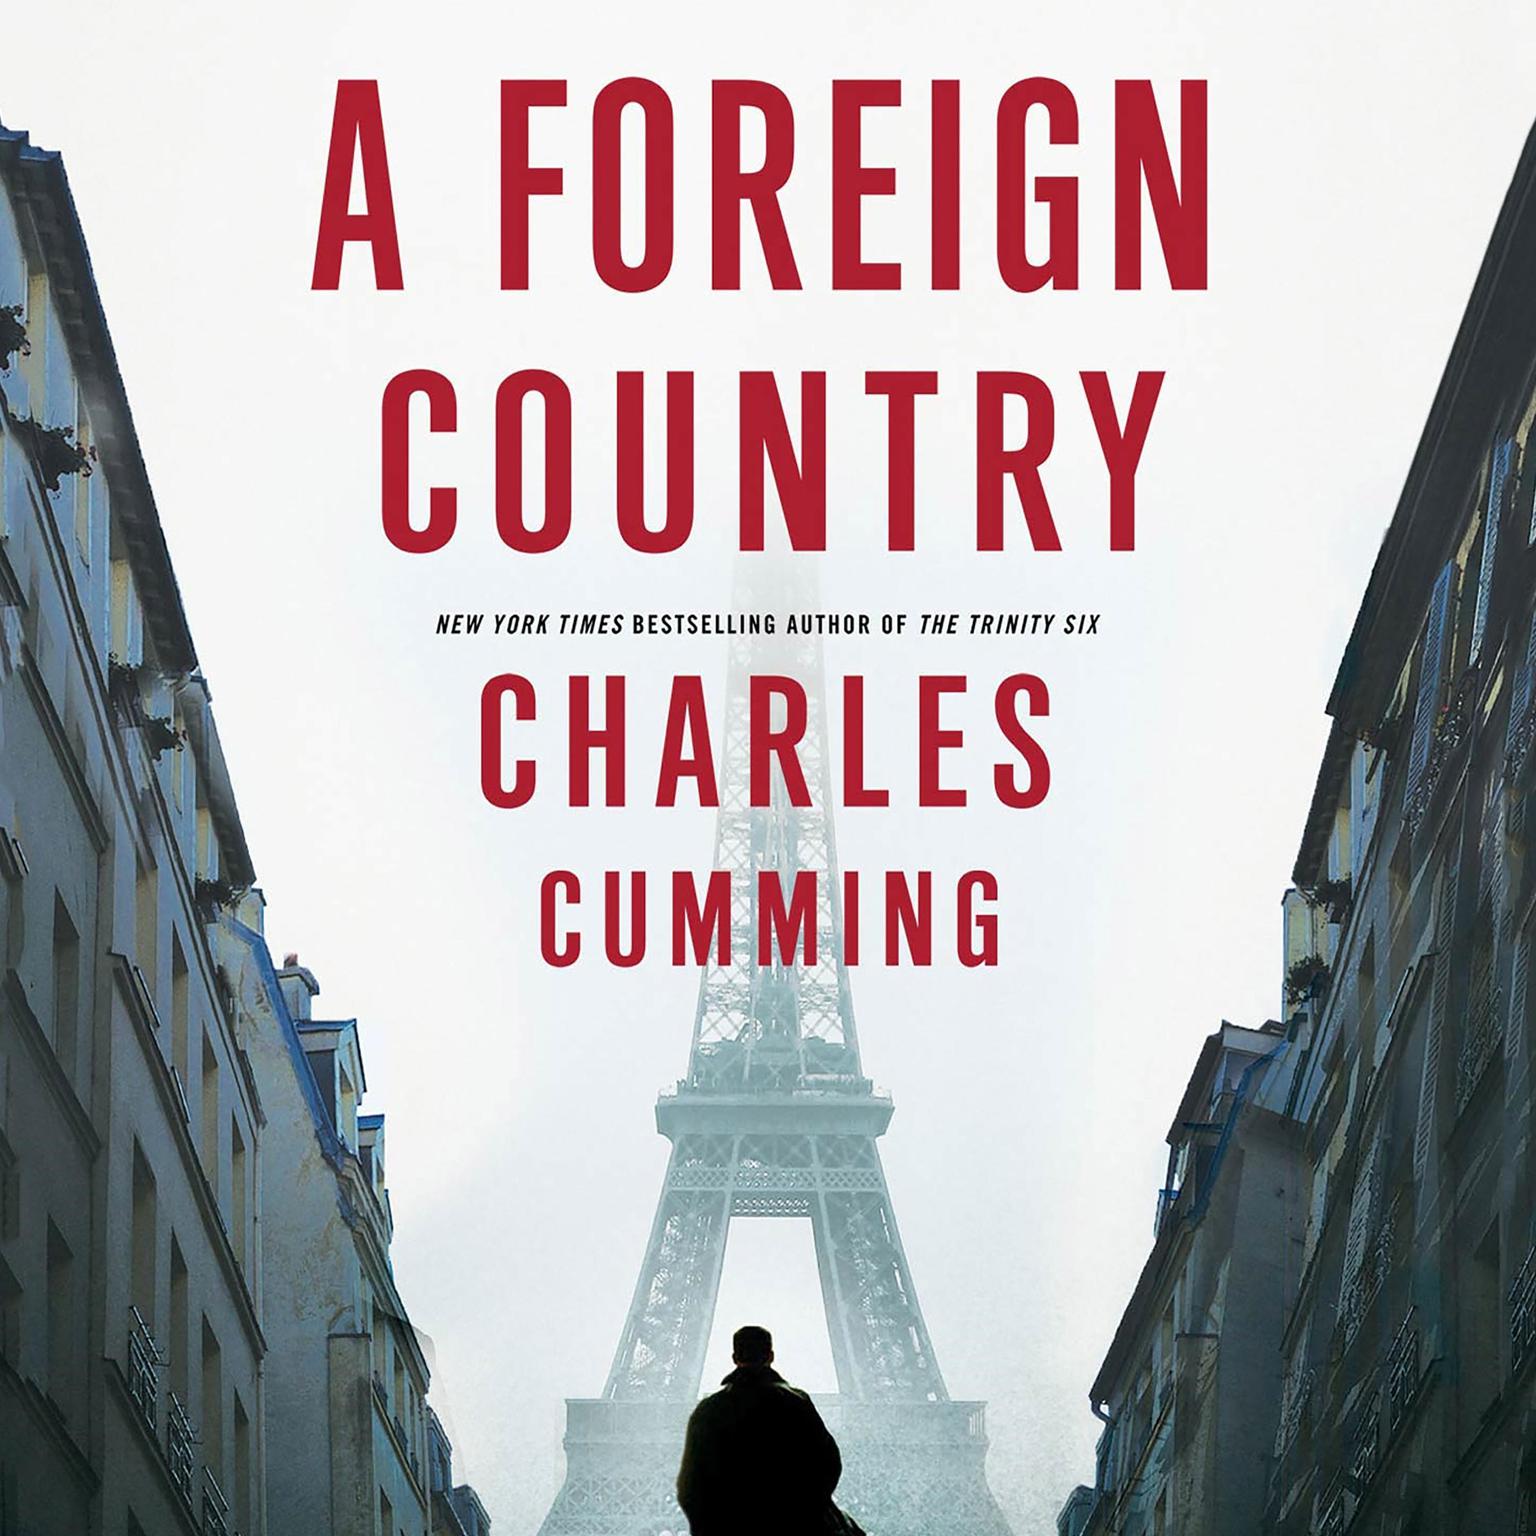 A Foreign Country: A Novel Audiobook, by Charles Cumming